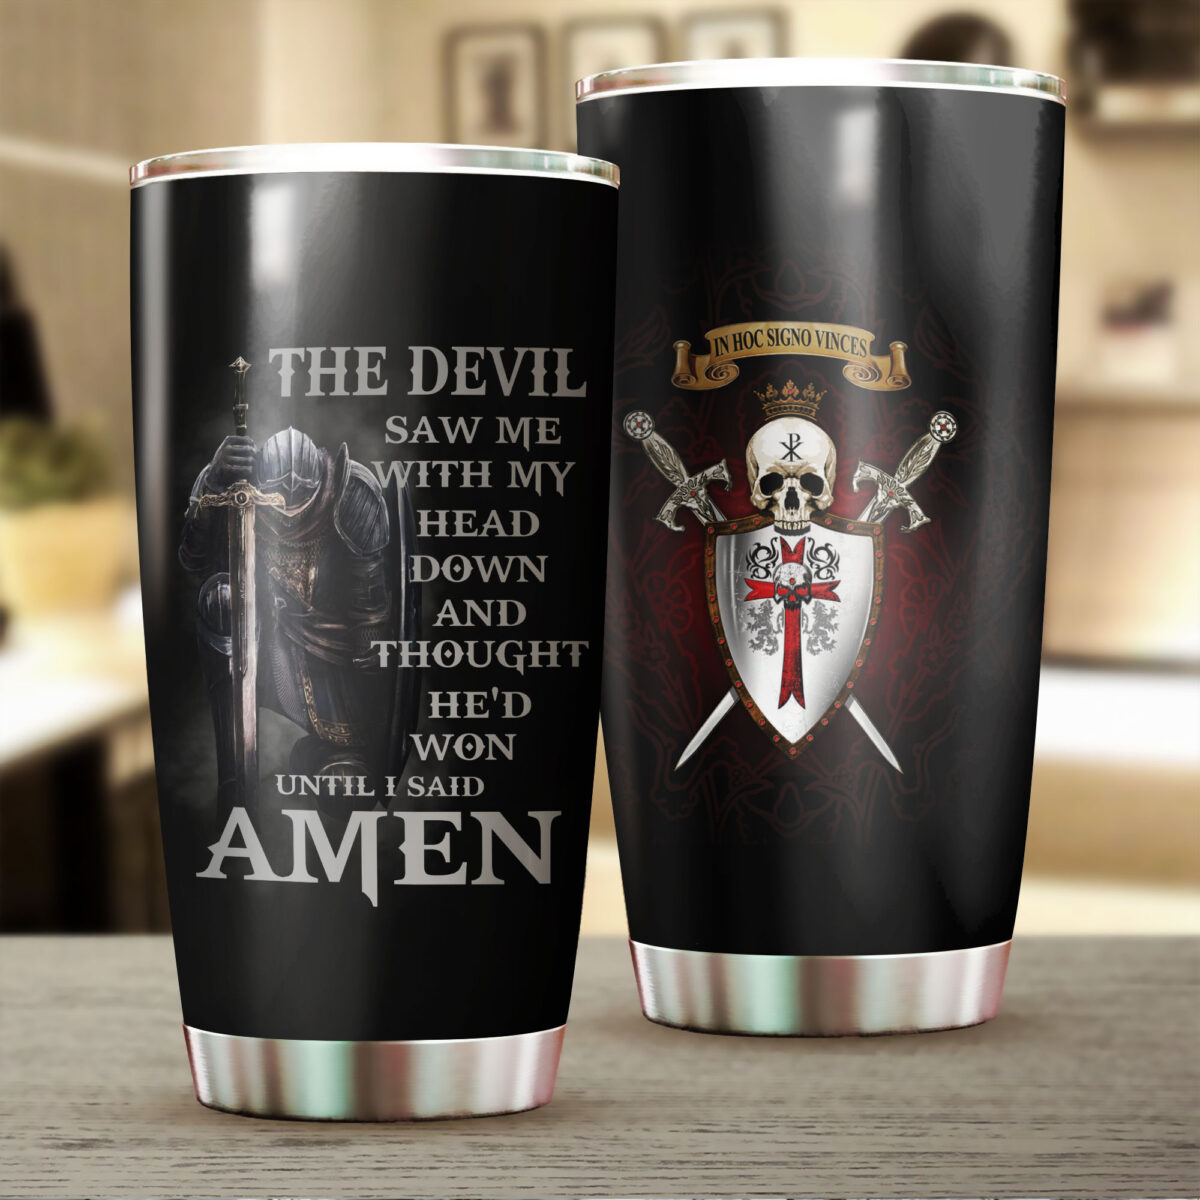 knights templar the devil saw me with my head down and thought hed won until i said amen stainless steel tumbler 2